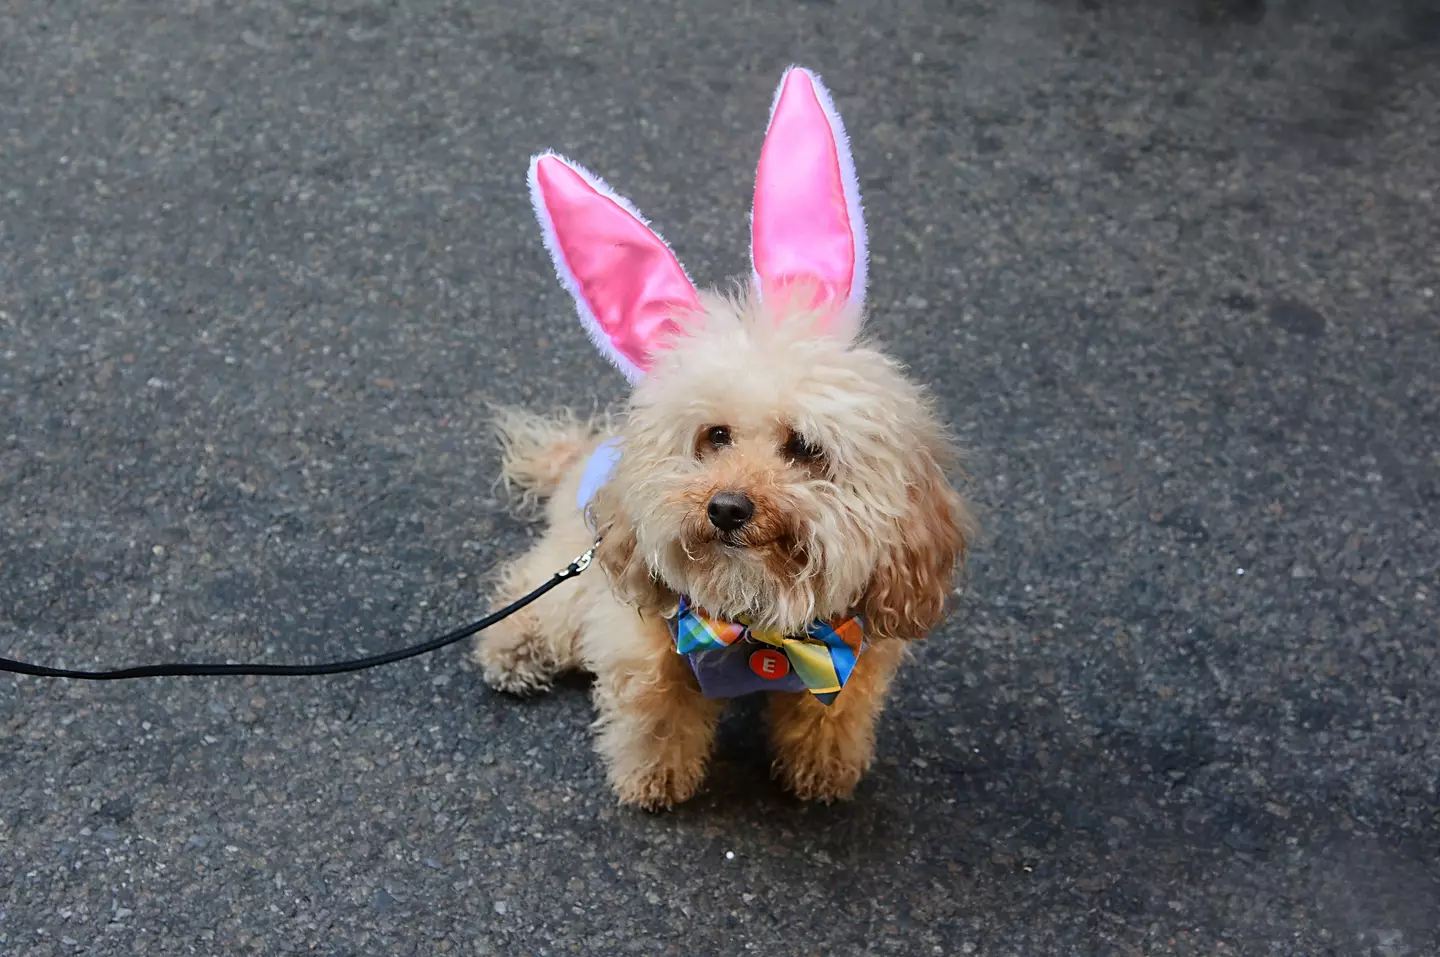 Be sure to take extra precaution to ensure your four-legged friend has a fun Easter too.